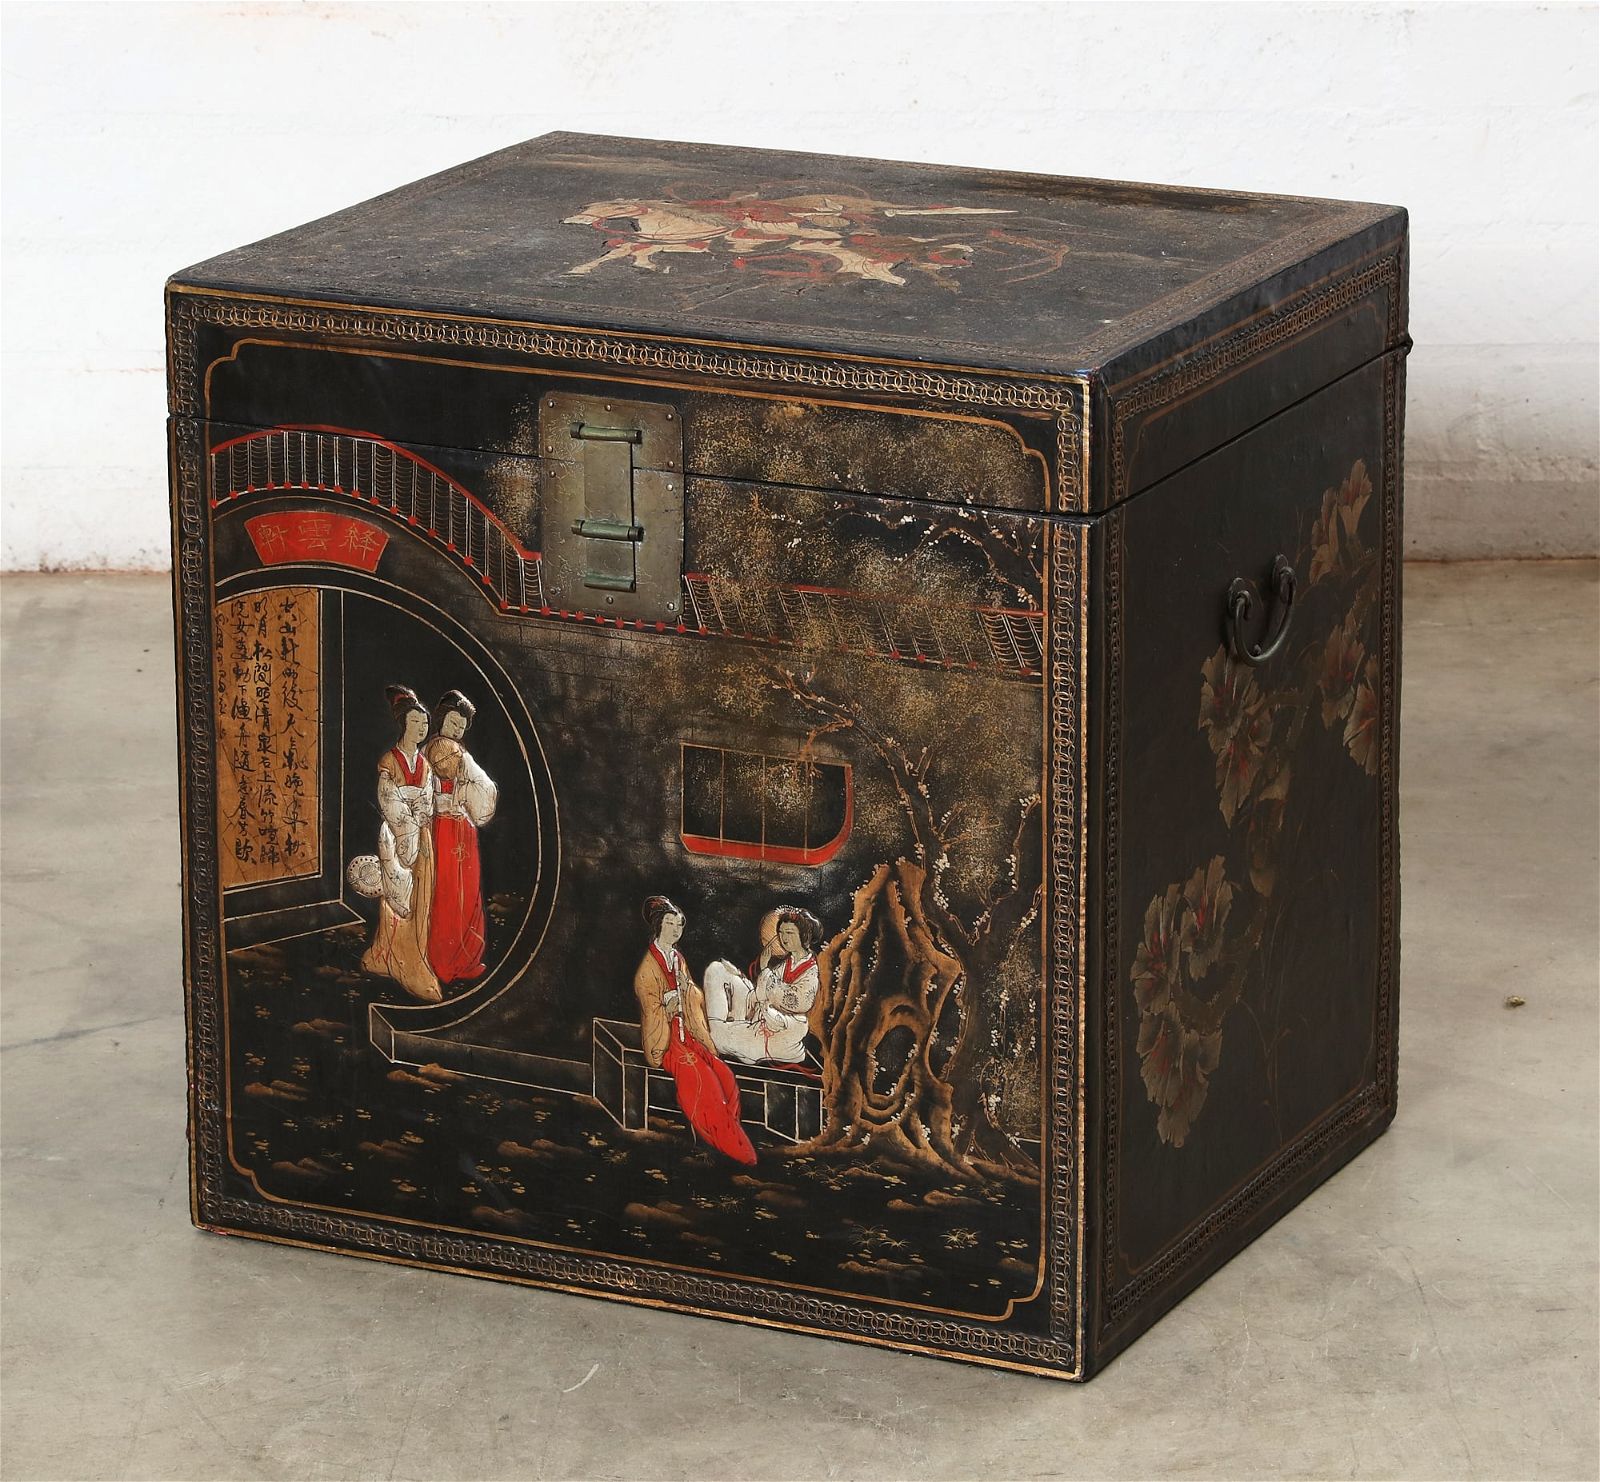 A JAPANESE LACQUERED TRUNKA Japanese